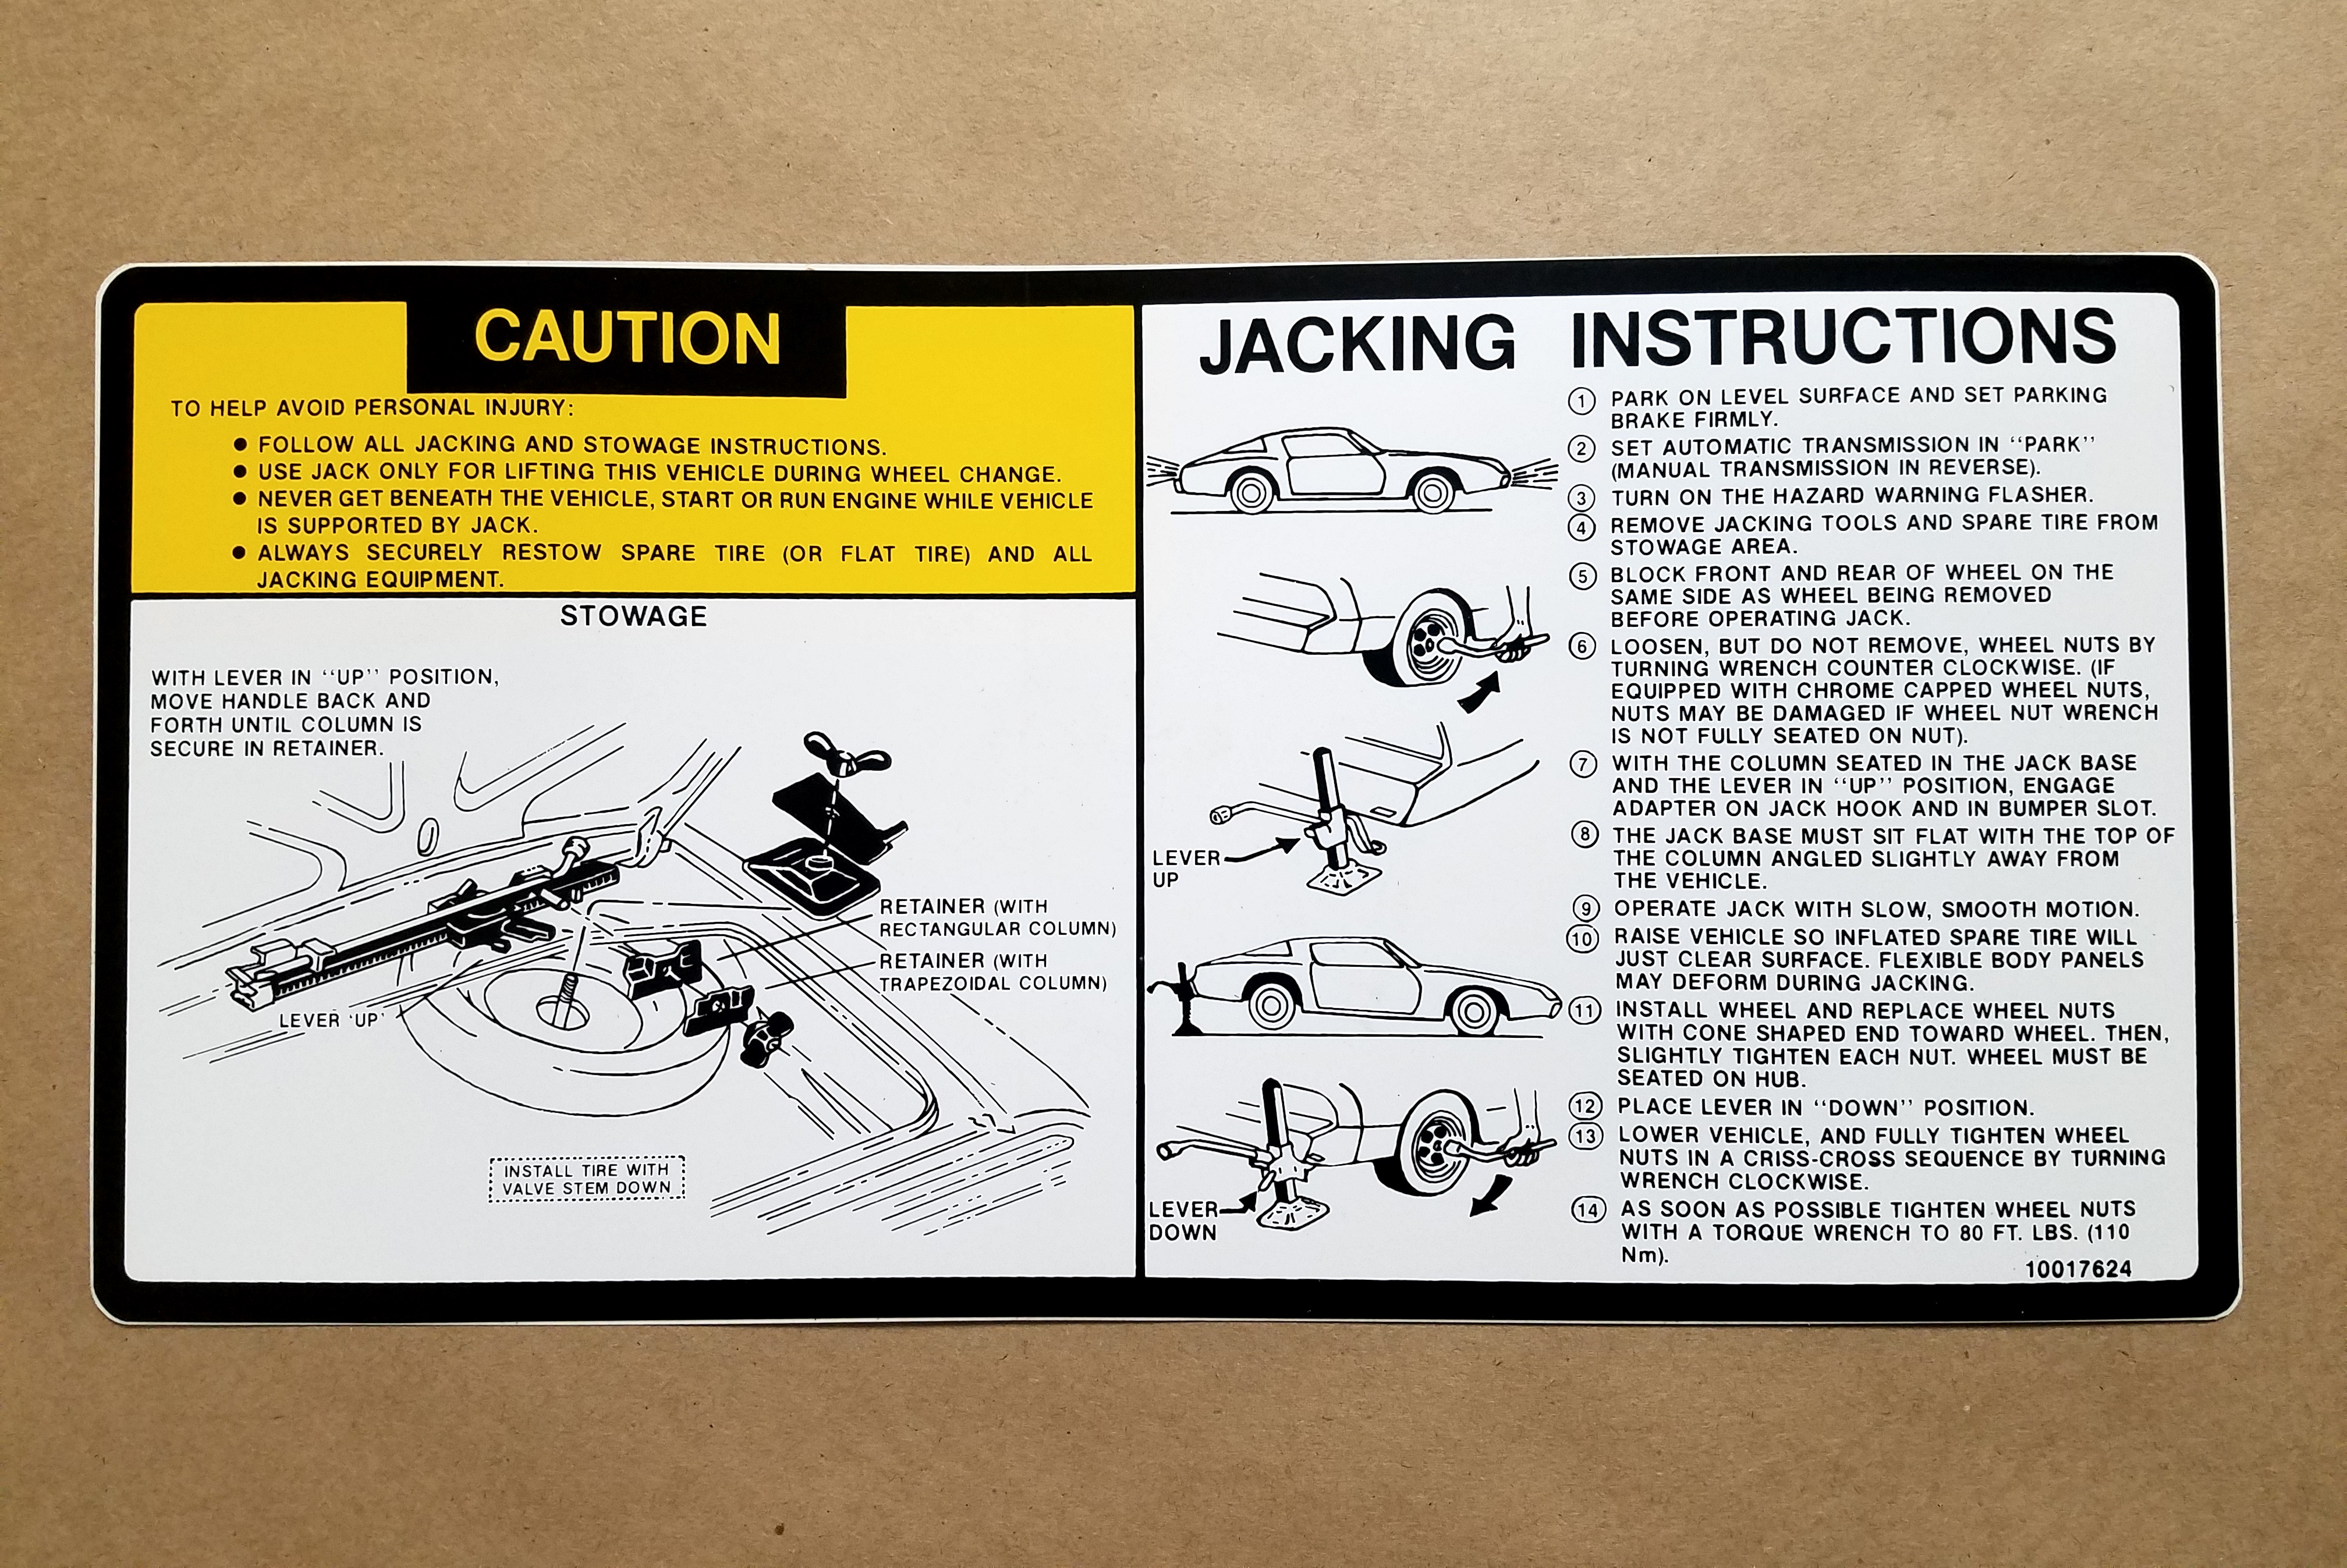 1981-82 Jack Instructions Decal GM 10017624